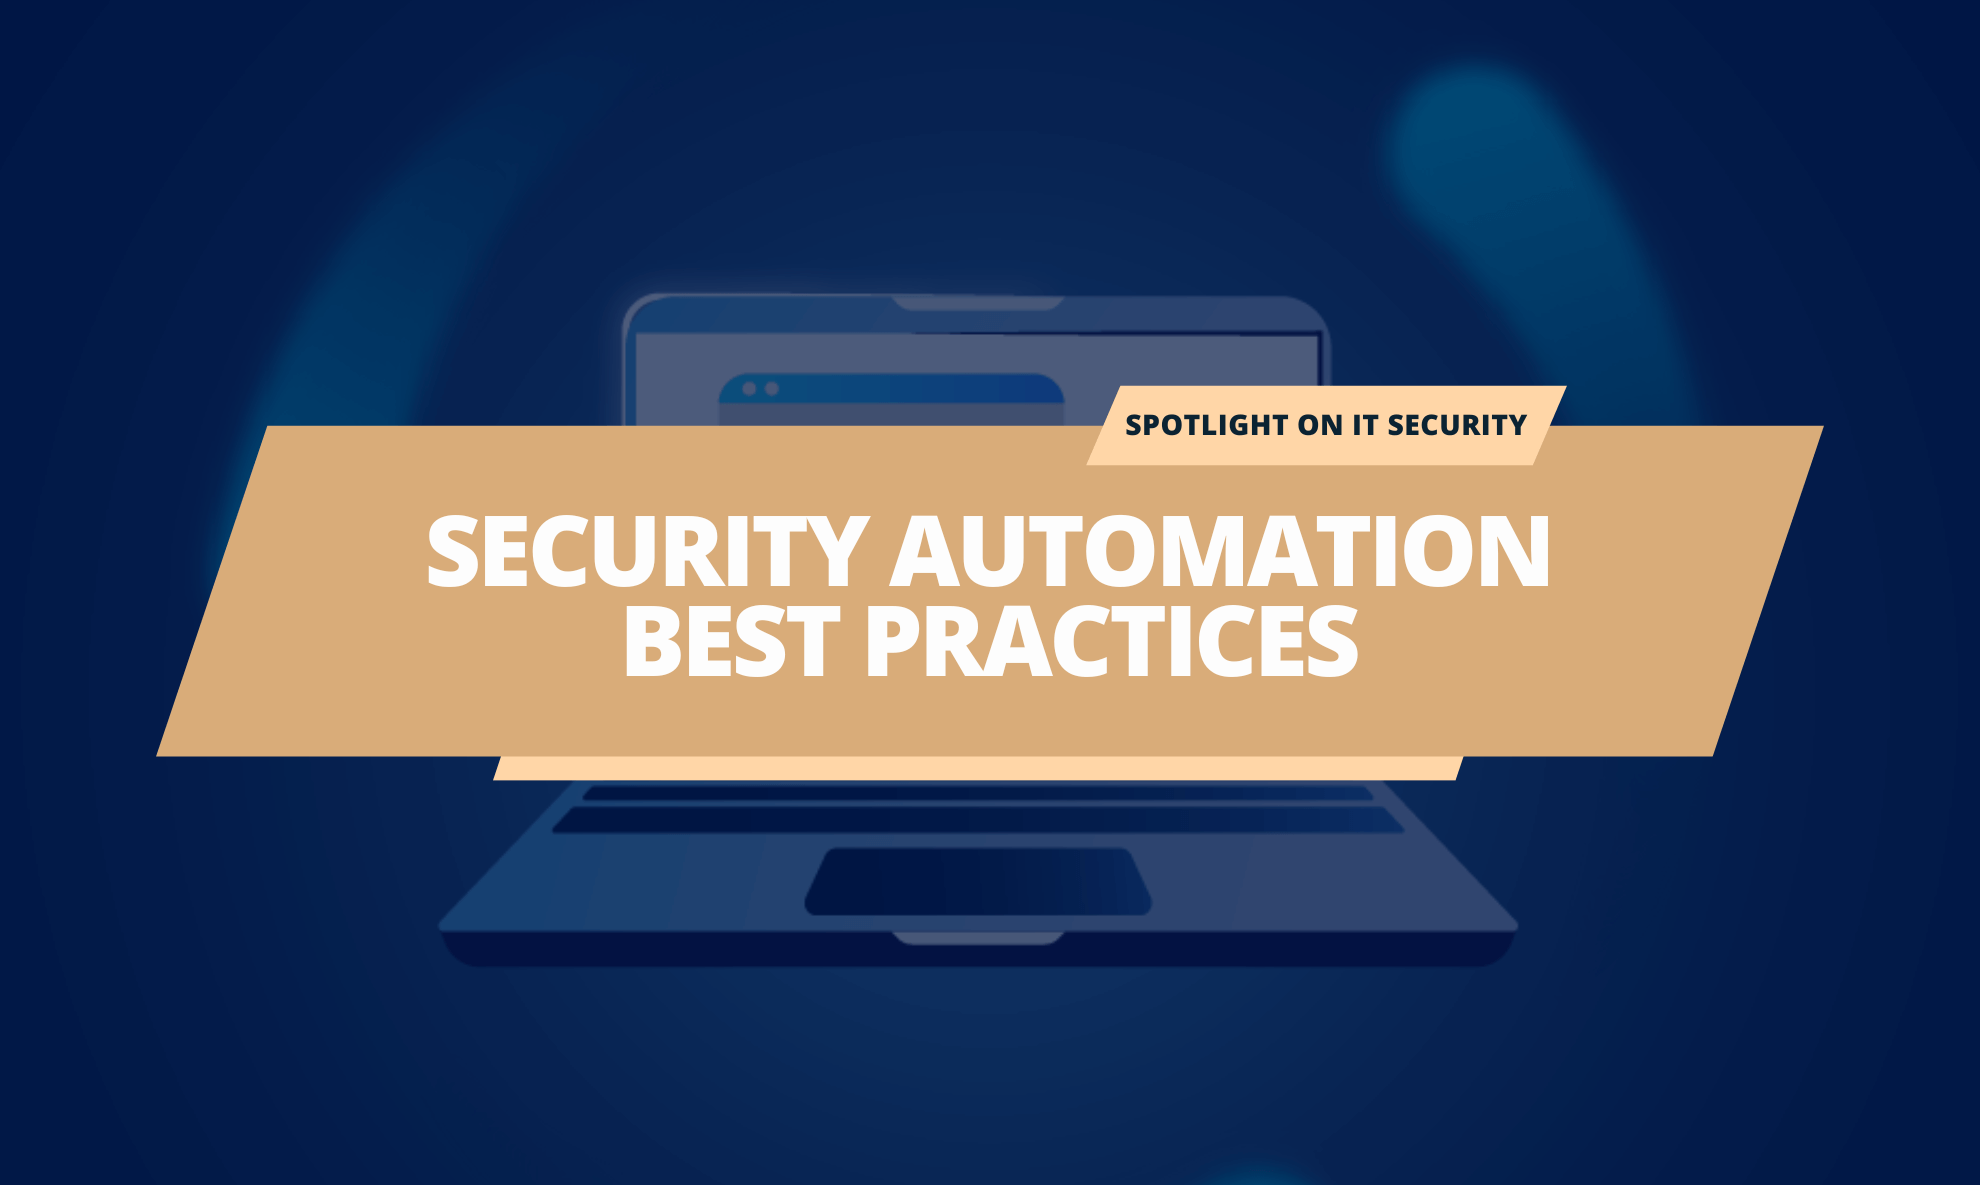 4 Security Automation Best Practices